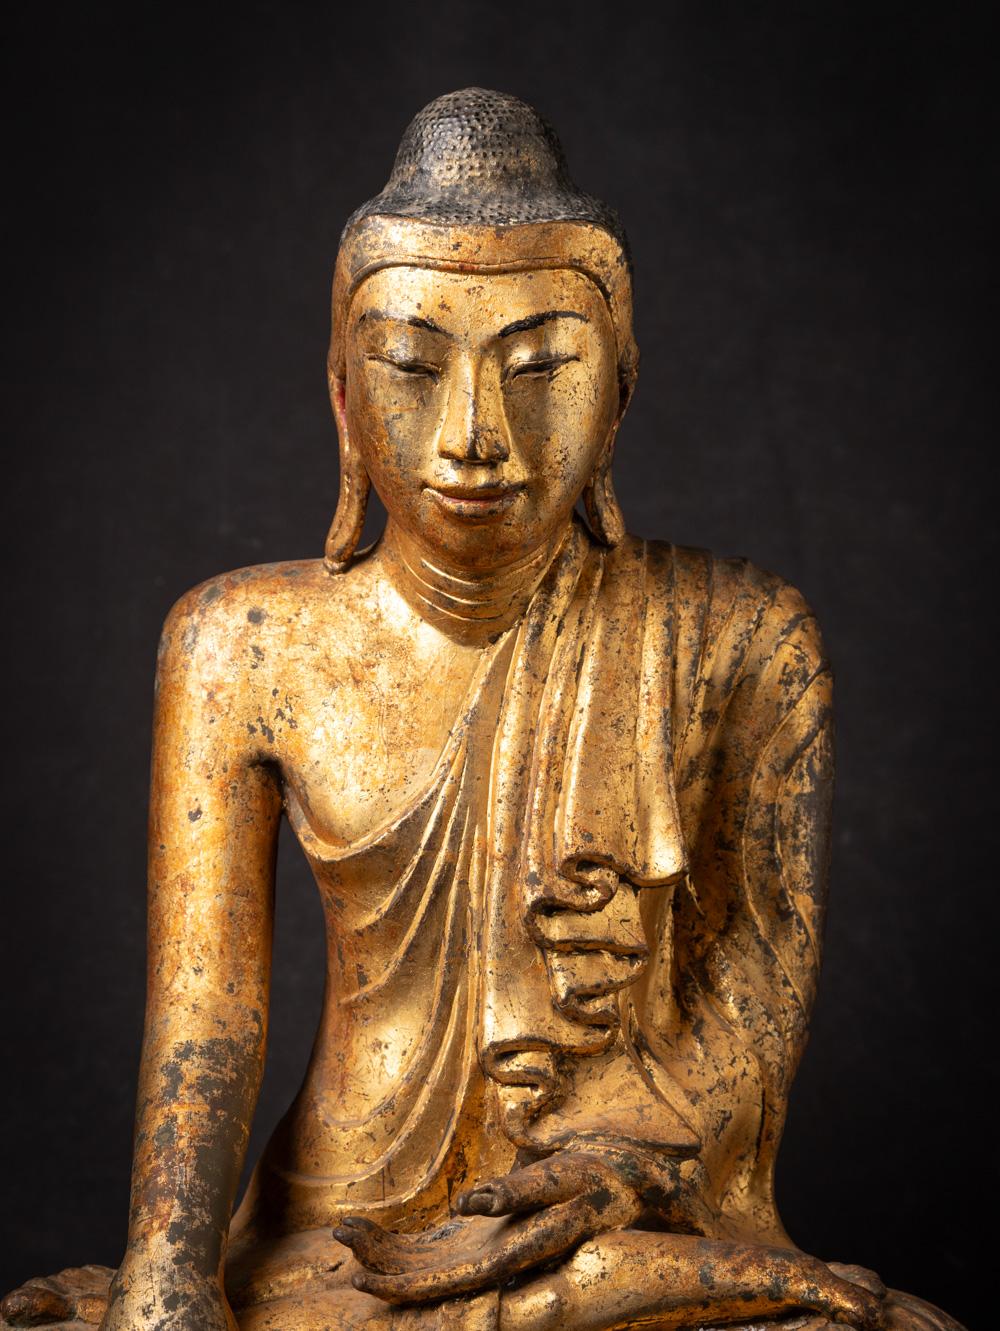 This 19th century Antique Burmese bronze Mandalay Buddha is a truly unique and special collectible piece. Standing at 57,5 cm high, 46,5 cm wide, and 27,5 cm deep, it is made of bronze and it has been gilded with 24 krt gold leaf, adding to its